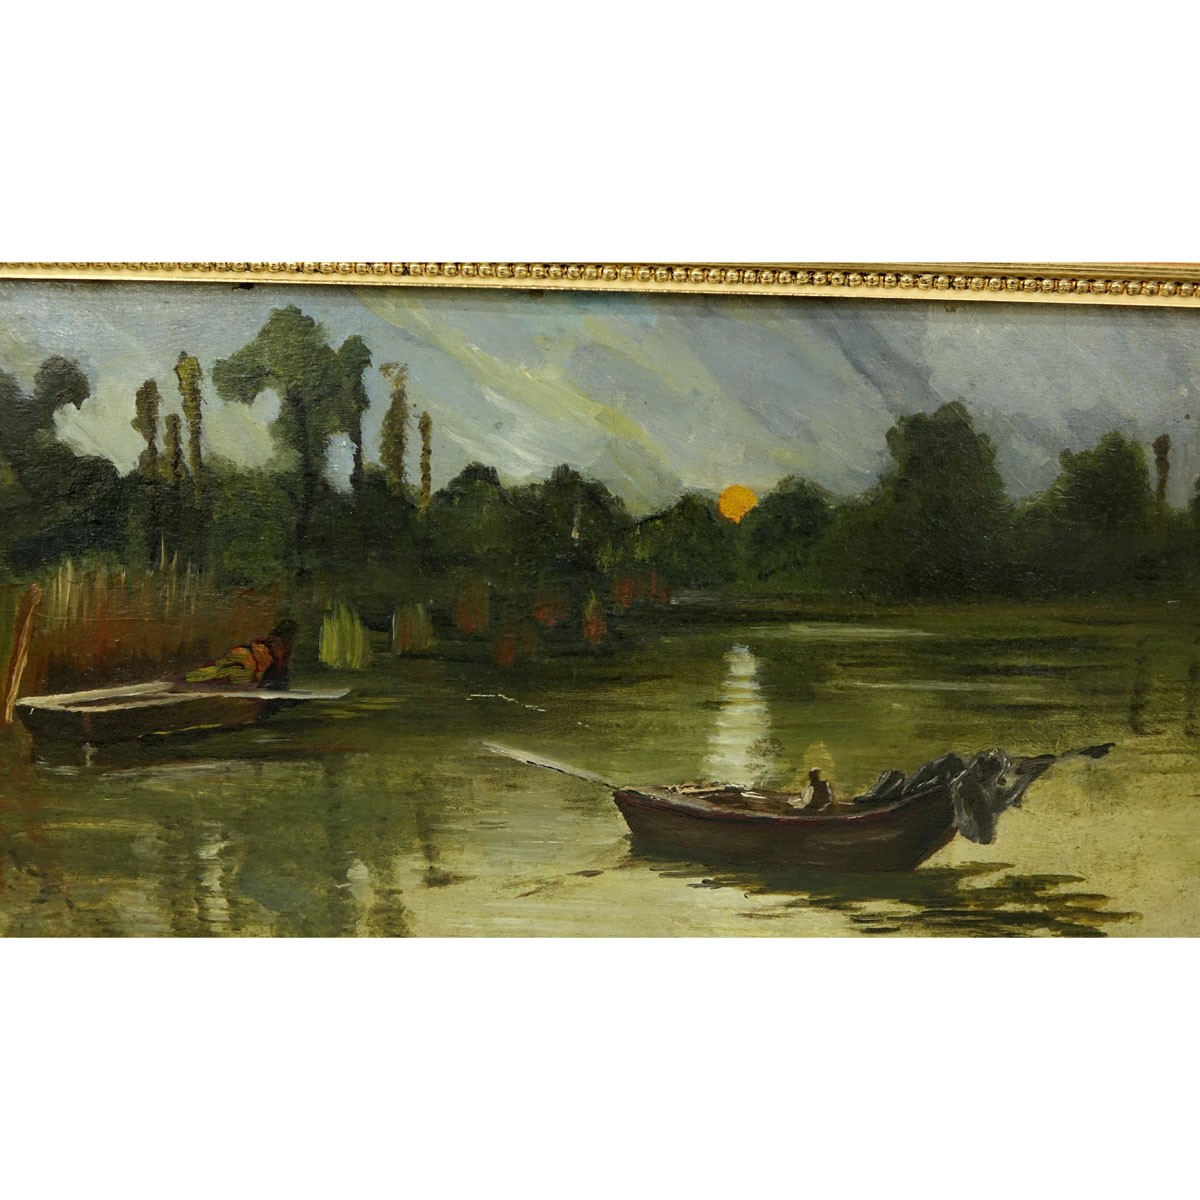 19/20th Century Egyptian School Oil on Board, Paddle Boat in Open Water, Unsigned. Some spotting, small scuffs line.